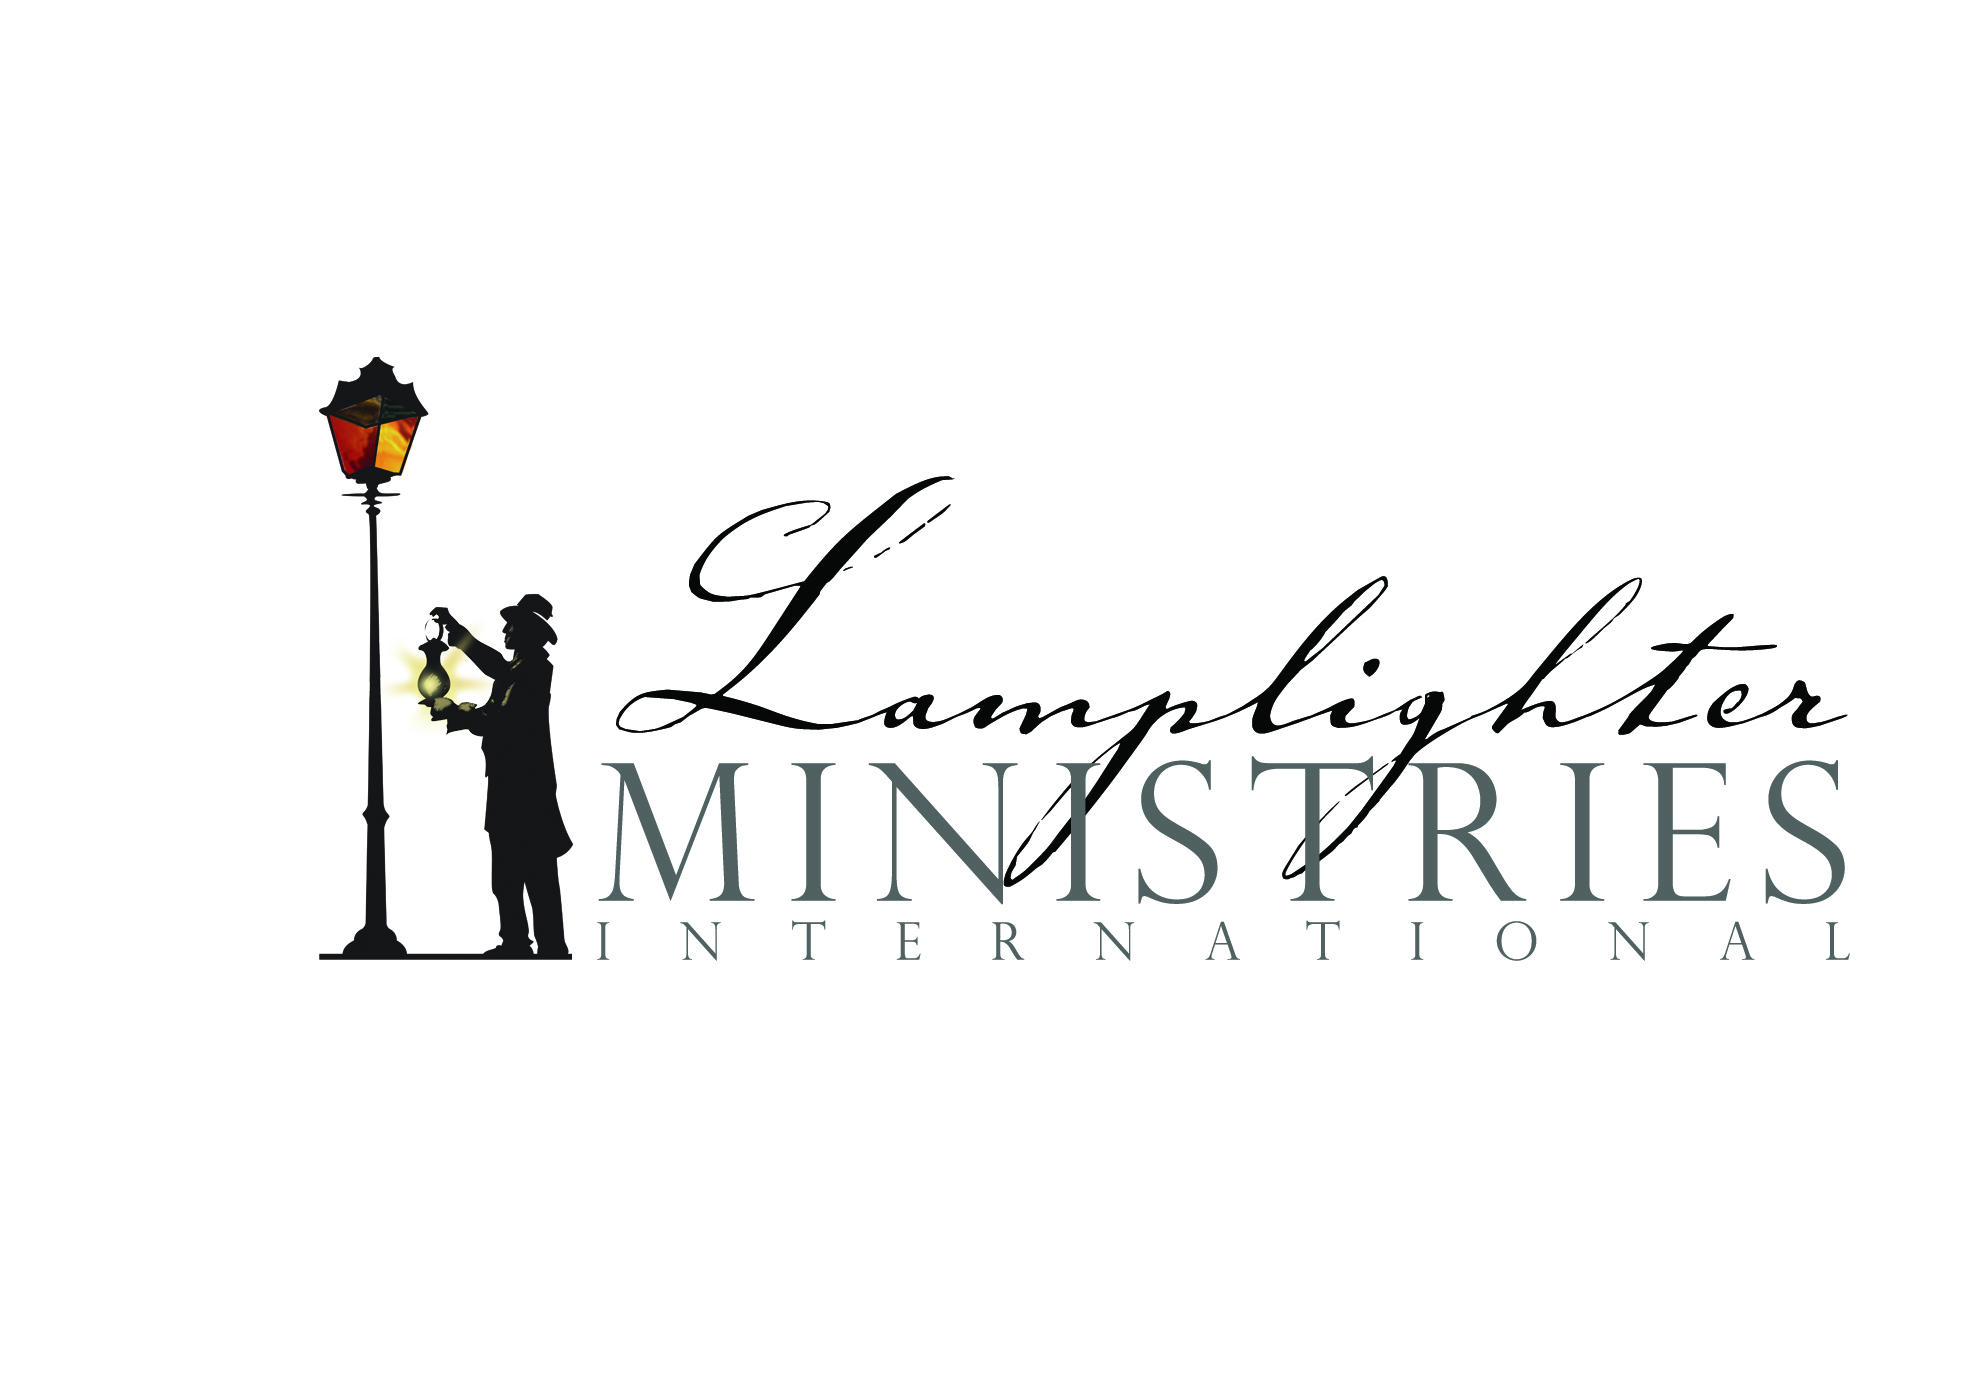 Lamplighter_Ministries_International_w_guy.png